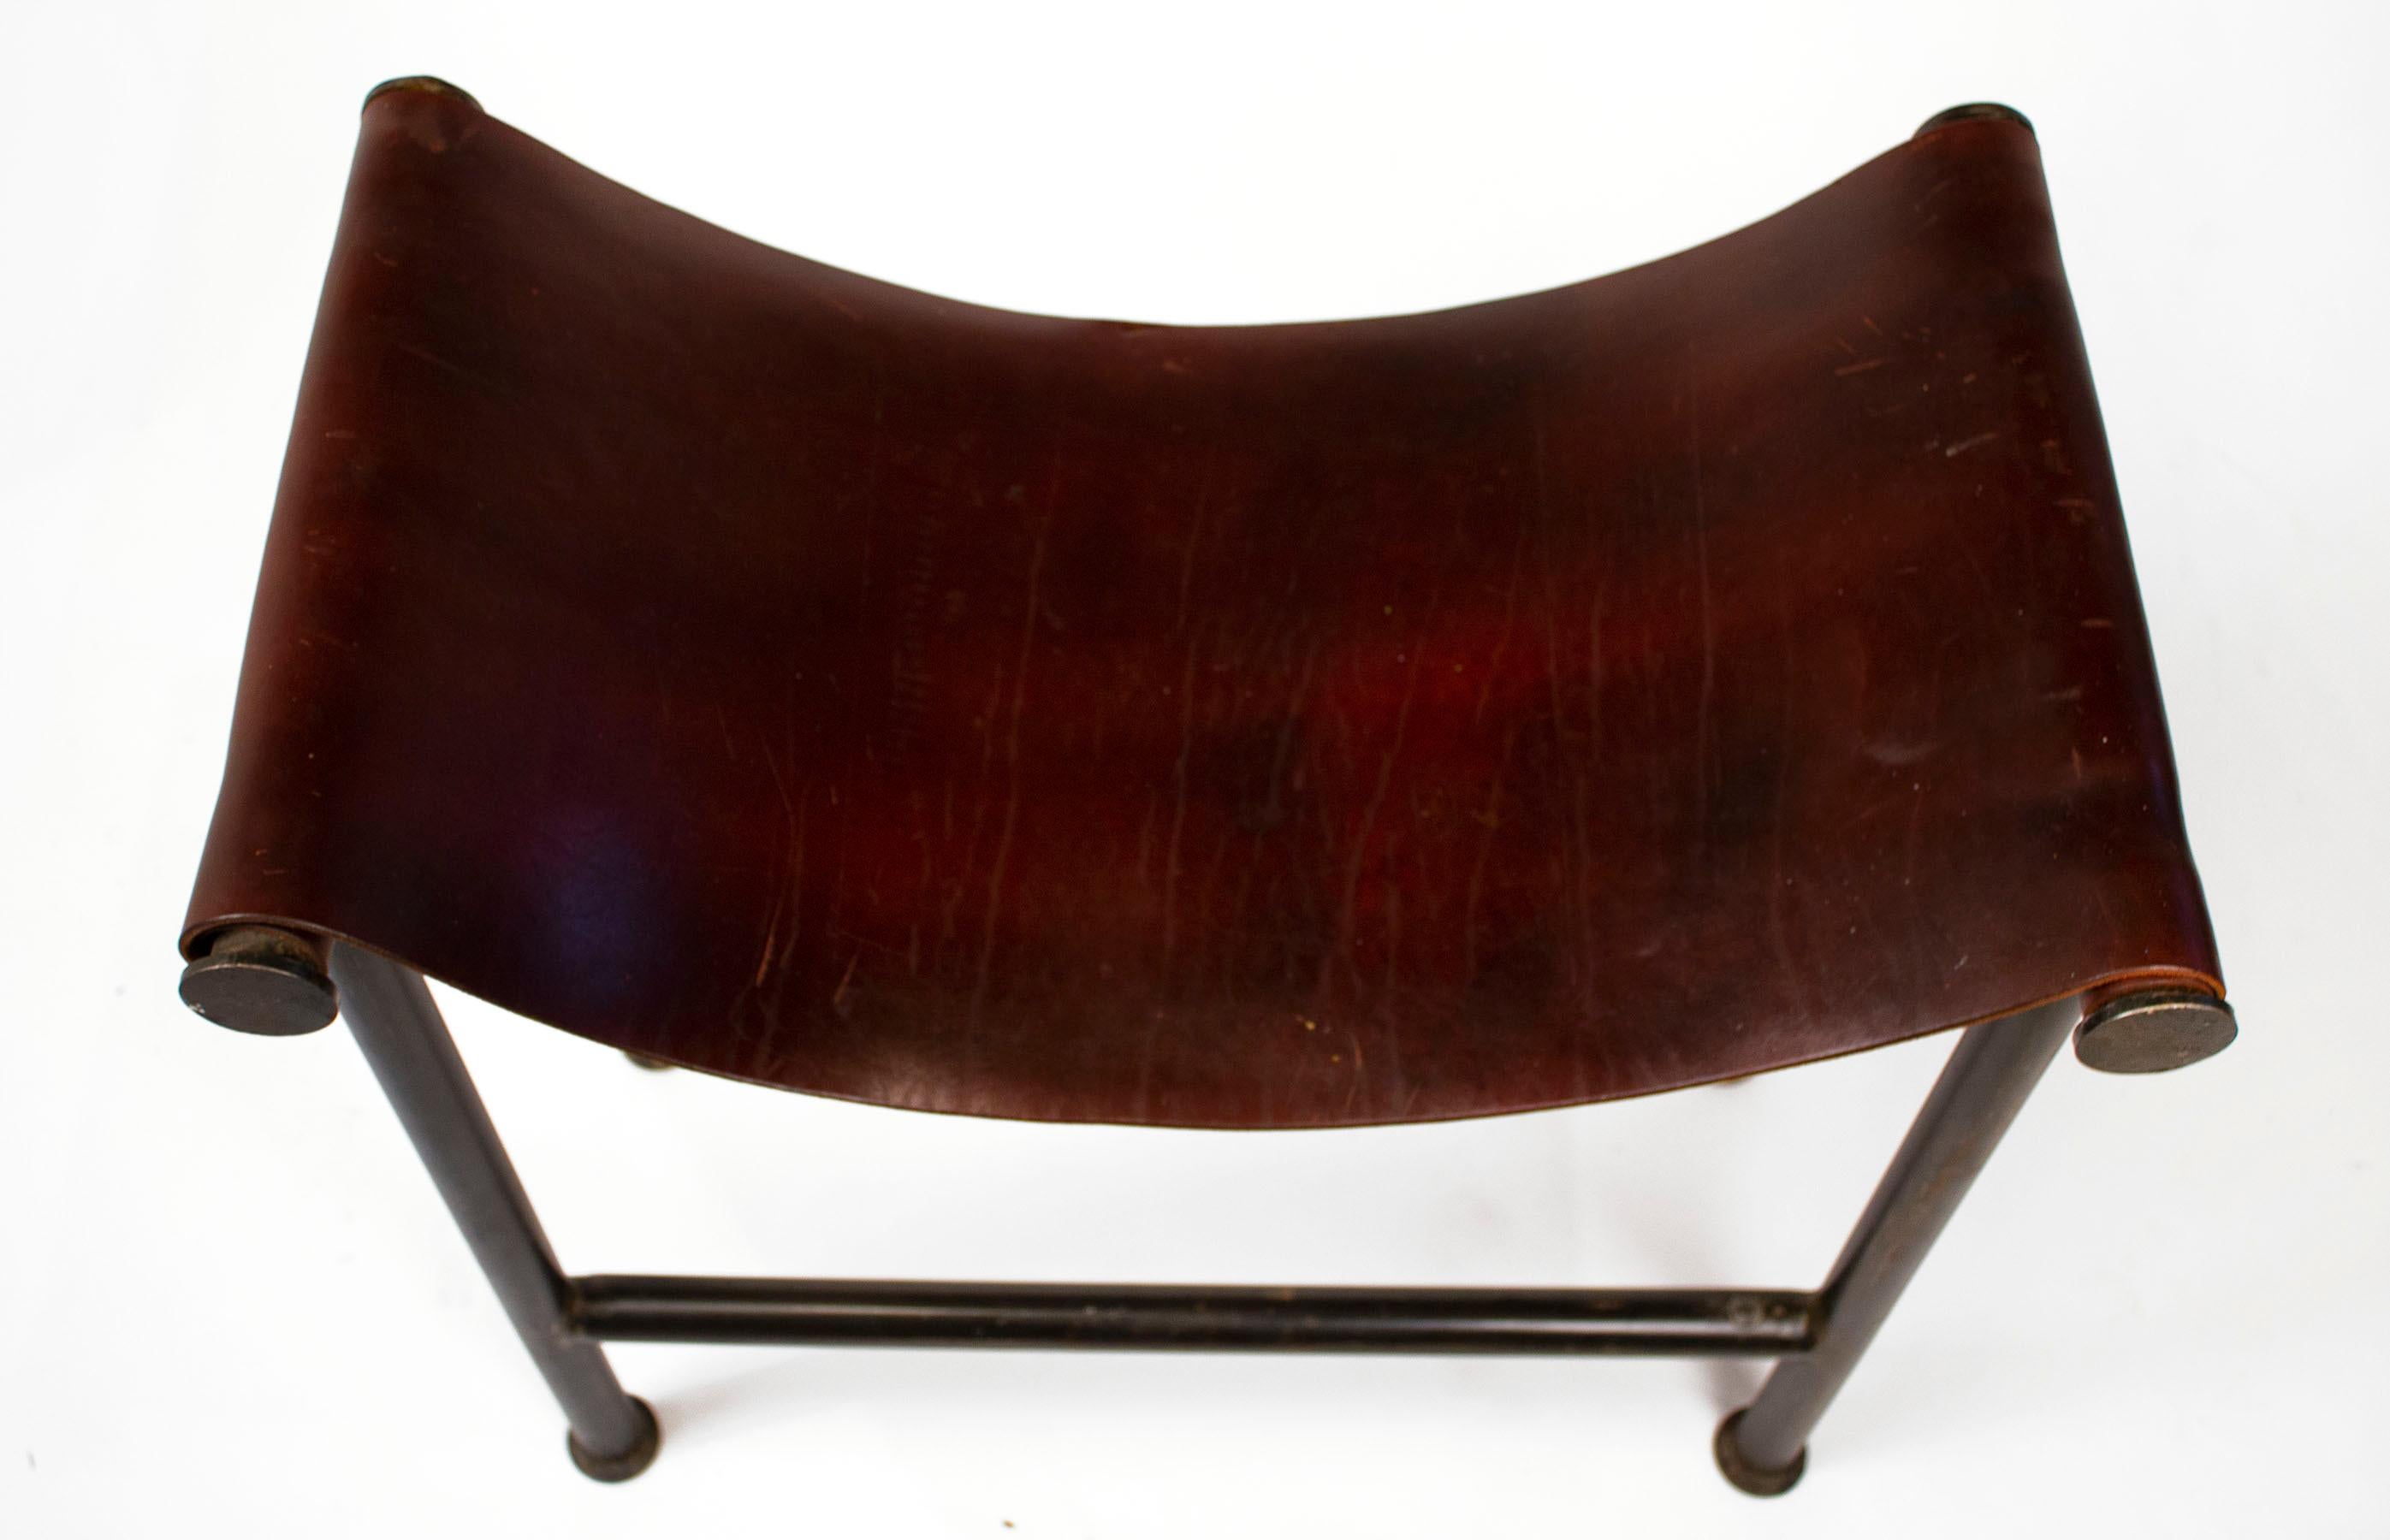 Steel and leather stool by Texas designer Jan Barboglio.
Thick saddle leather and patinated steel. Signed with her hallmark.